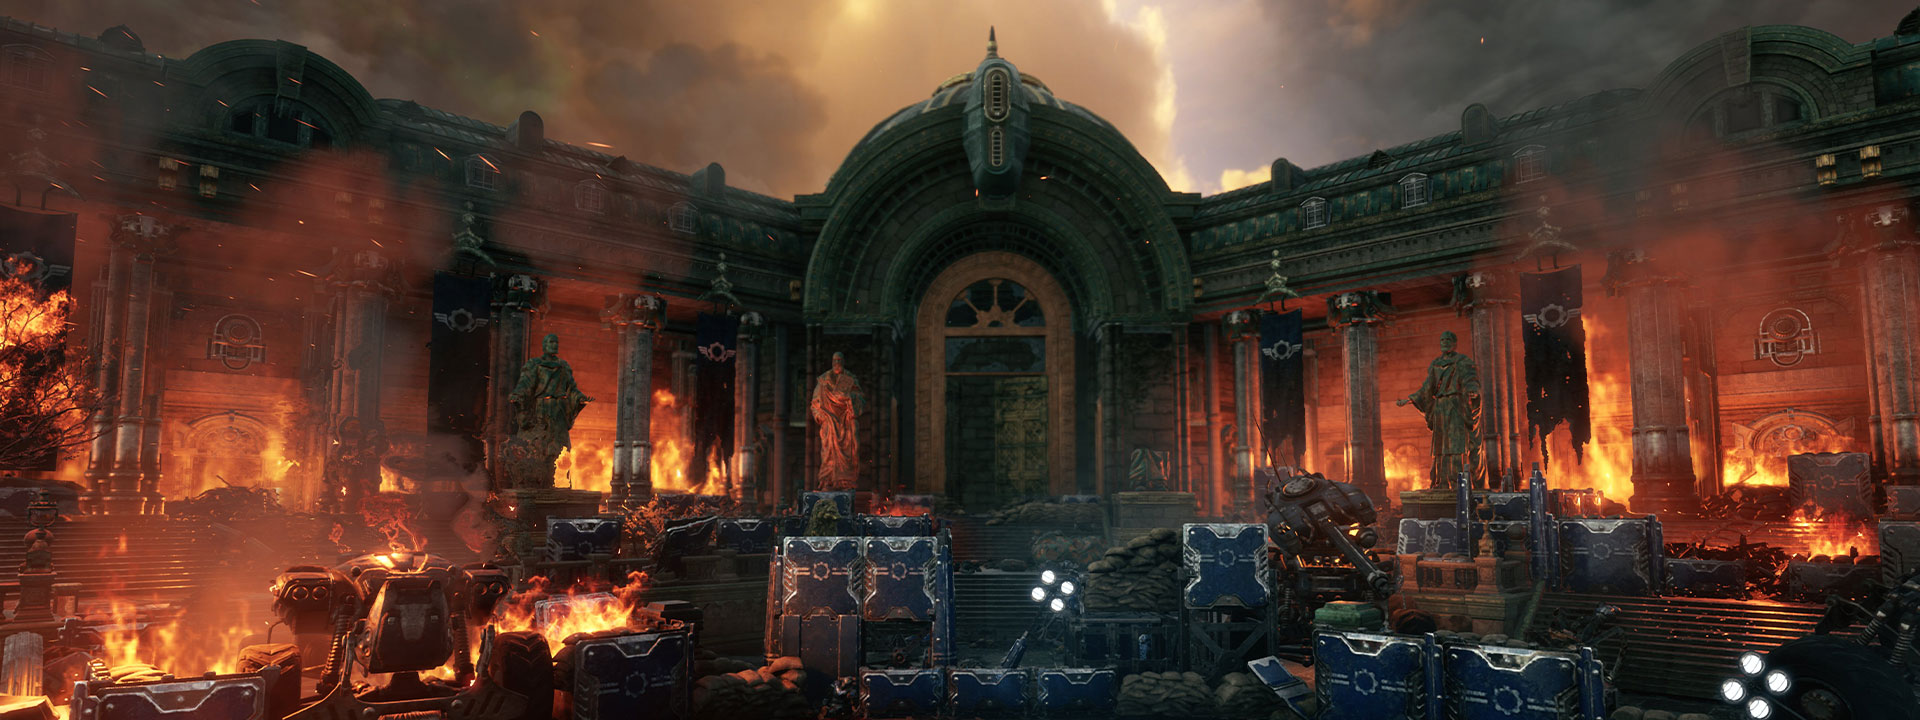 Burning building from Gears Tactics